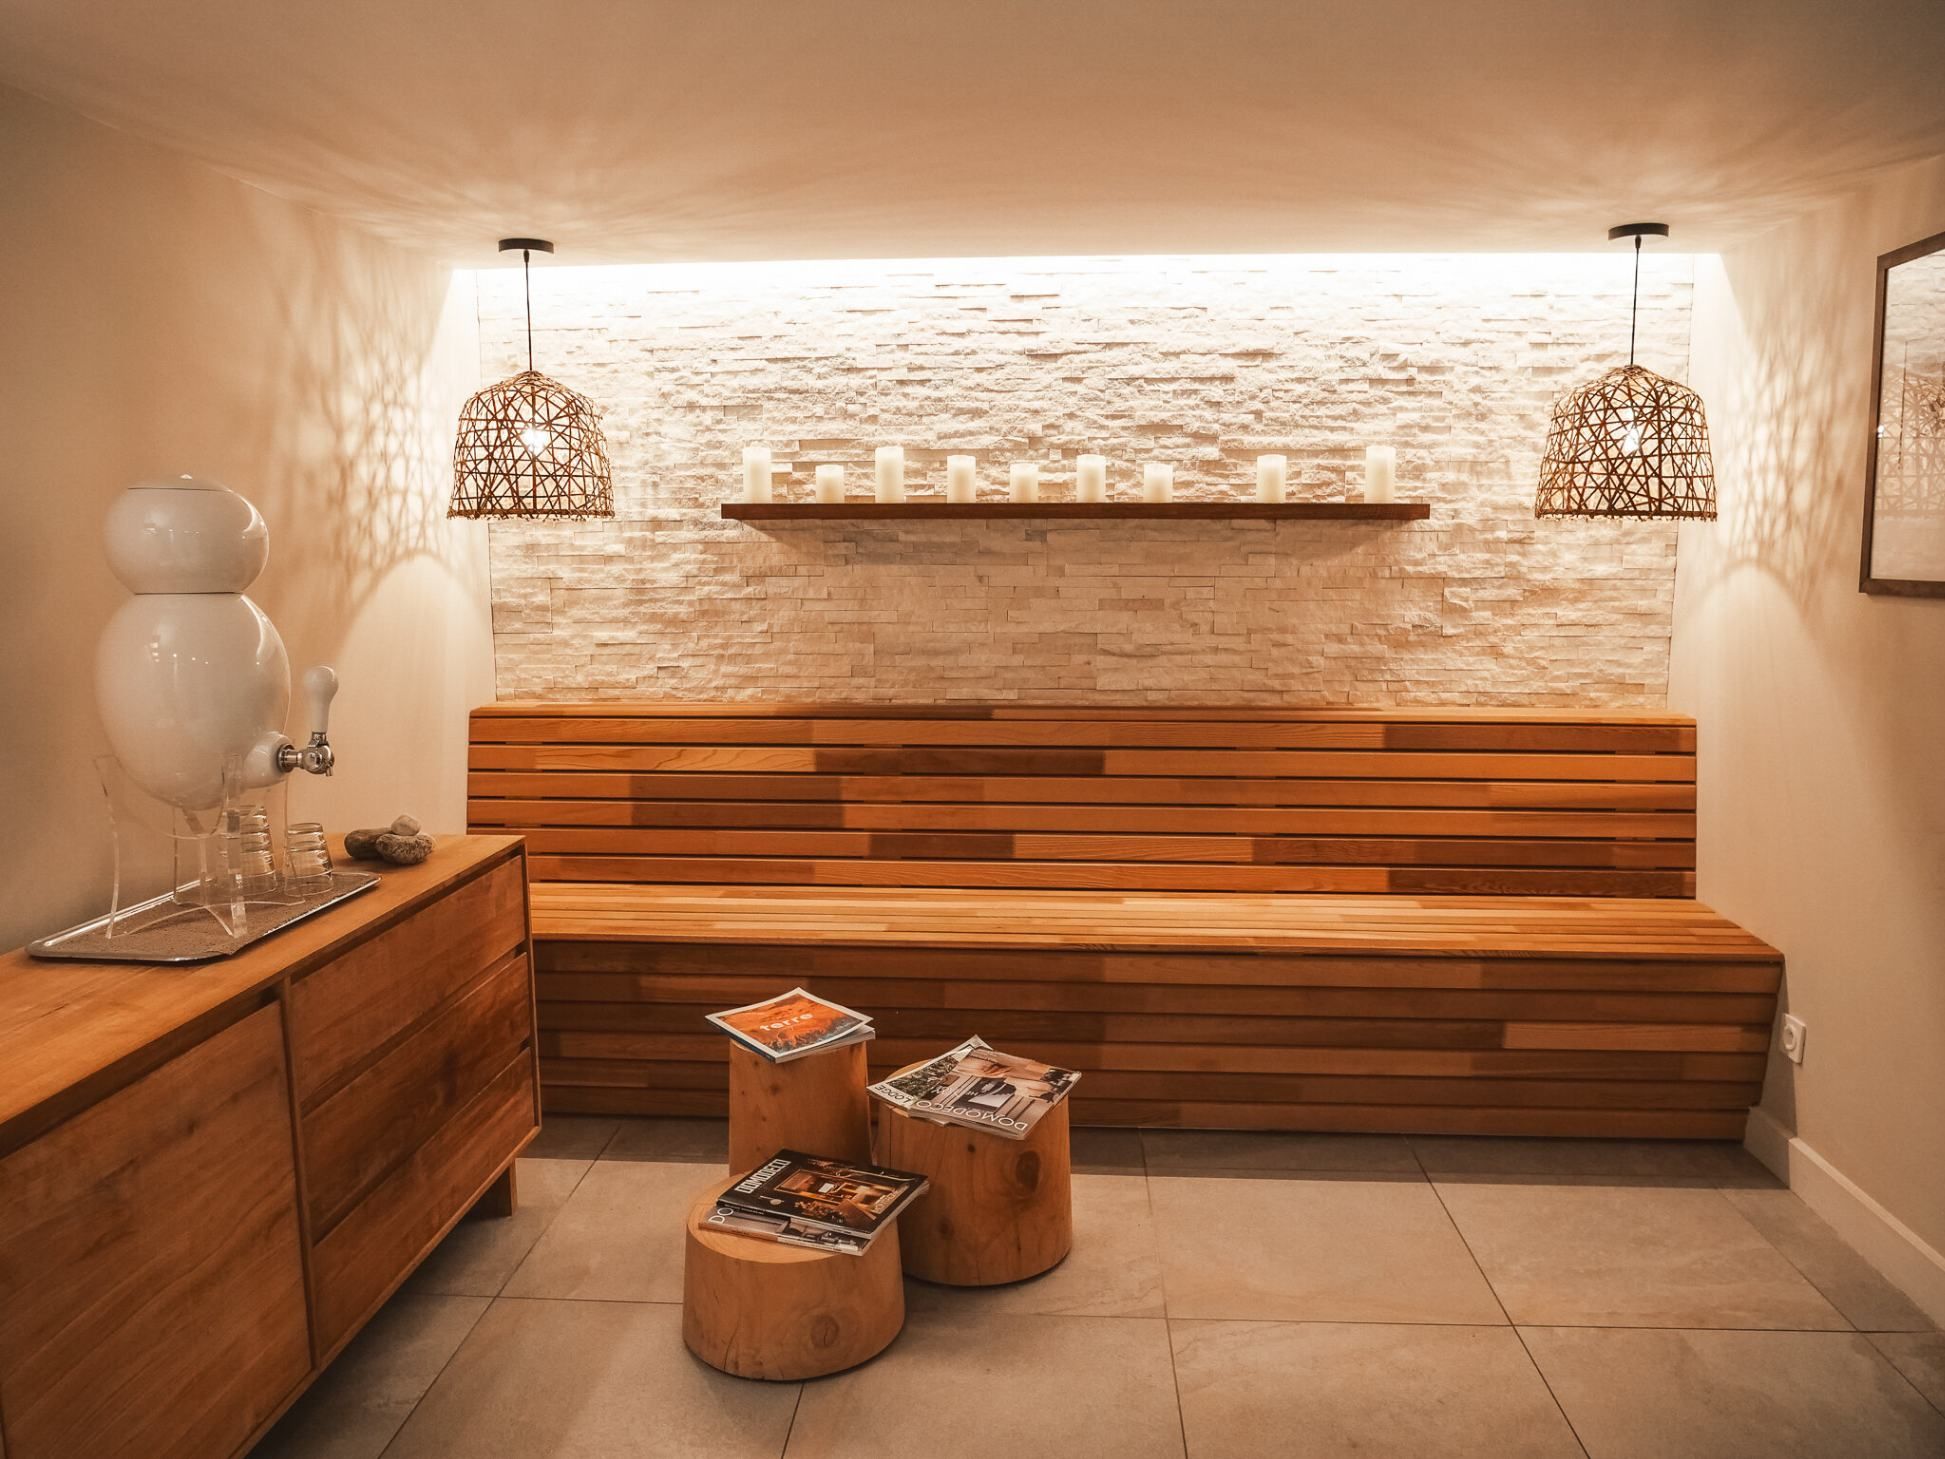 Spa with jacuzzi and Hammam for a relaxing time